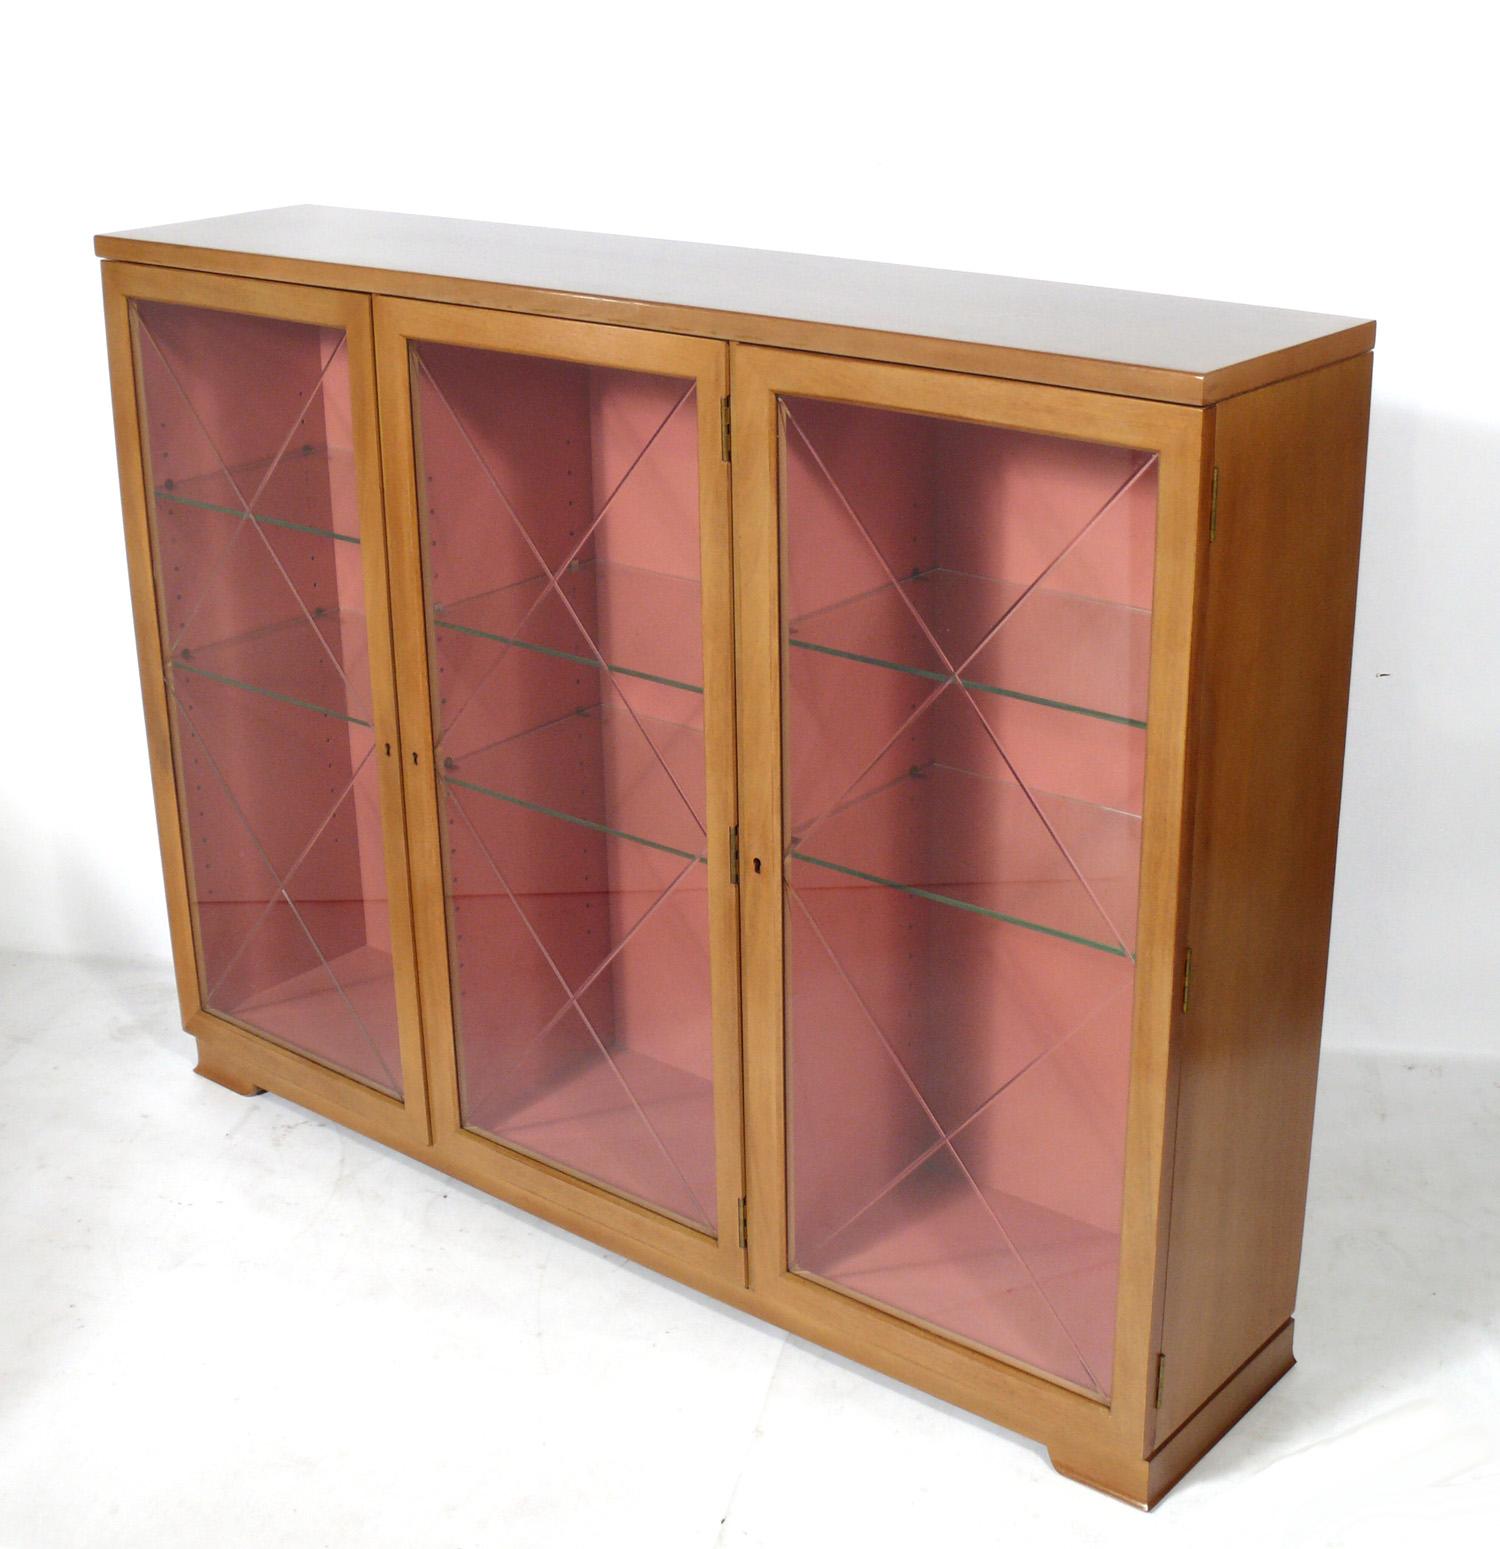 Elegant bookcase or vitrine, designed by Tommi Parzinger for Charak Modern, circa 1950s. This piece is a versatile size and can be used as a bookcase, vitrine, bar, or display case. It features three doors that open to reveal six adjustable glass